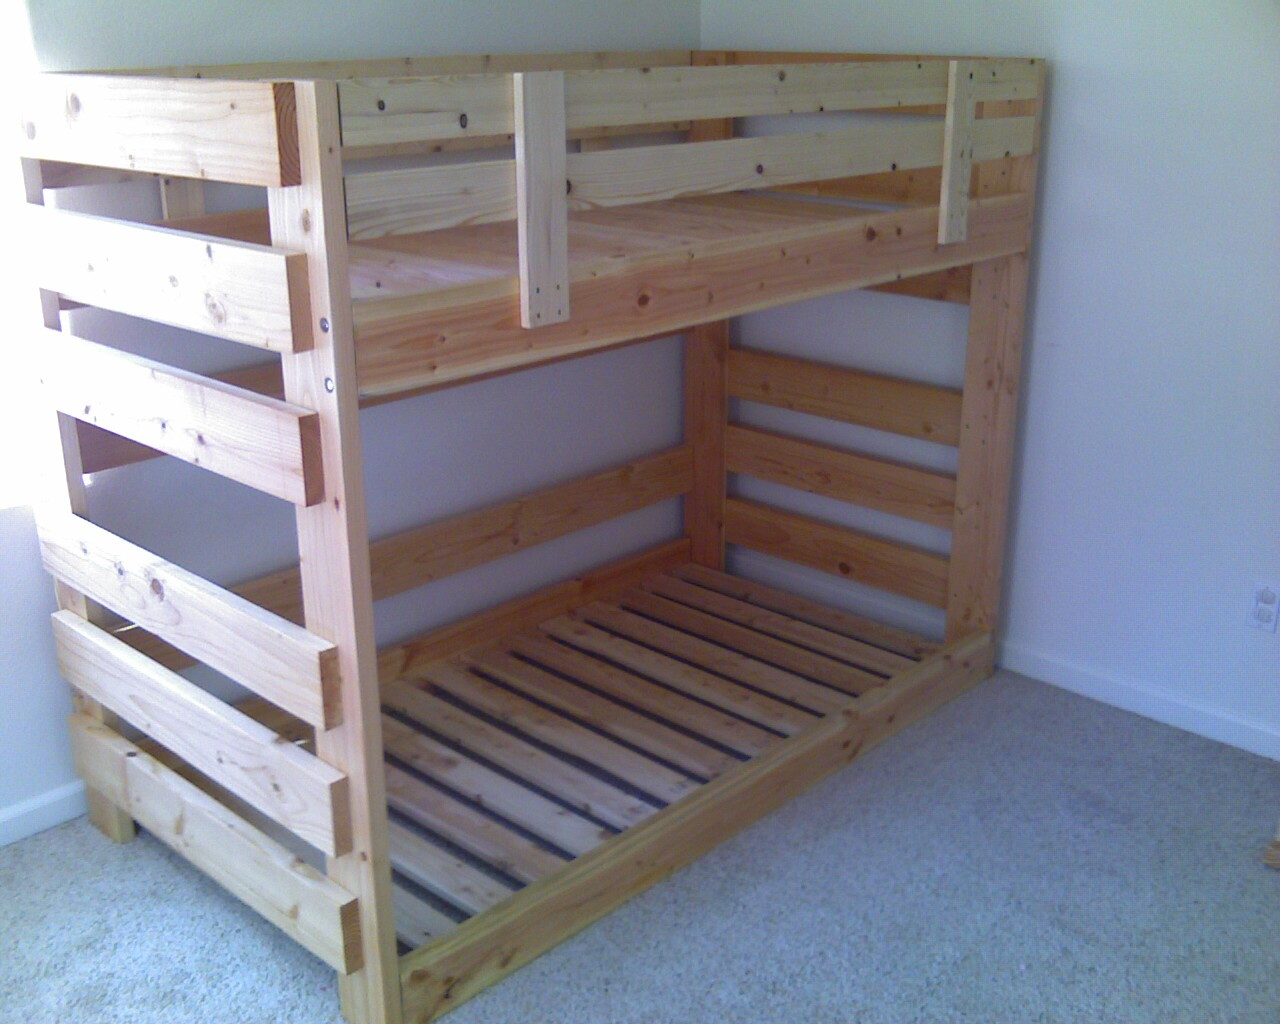 Todd S Custom Bunk Beds The Wood, Bunk Beds Made From Pallets